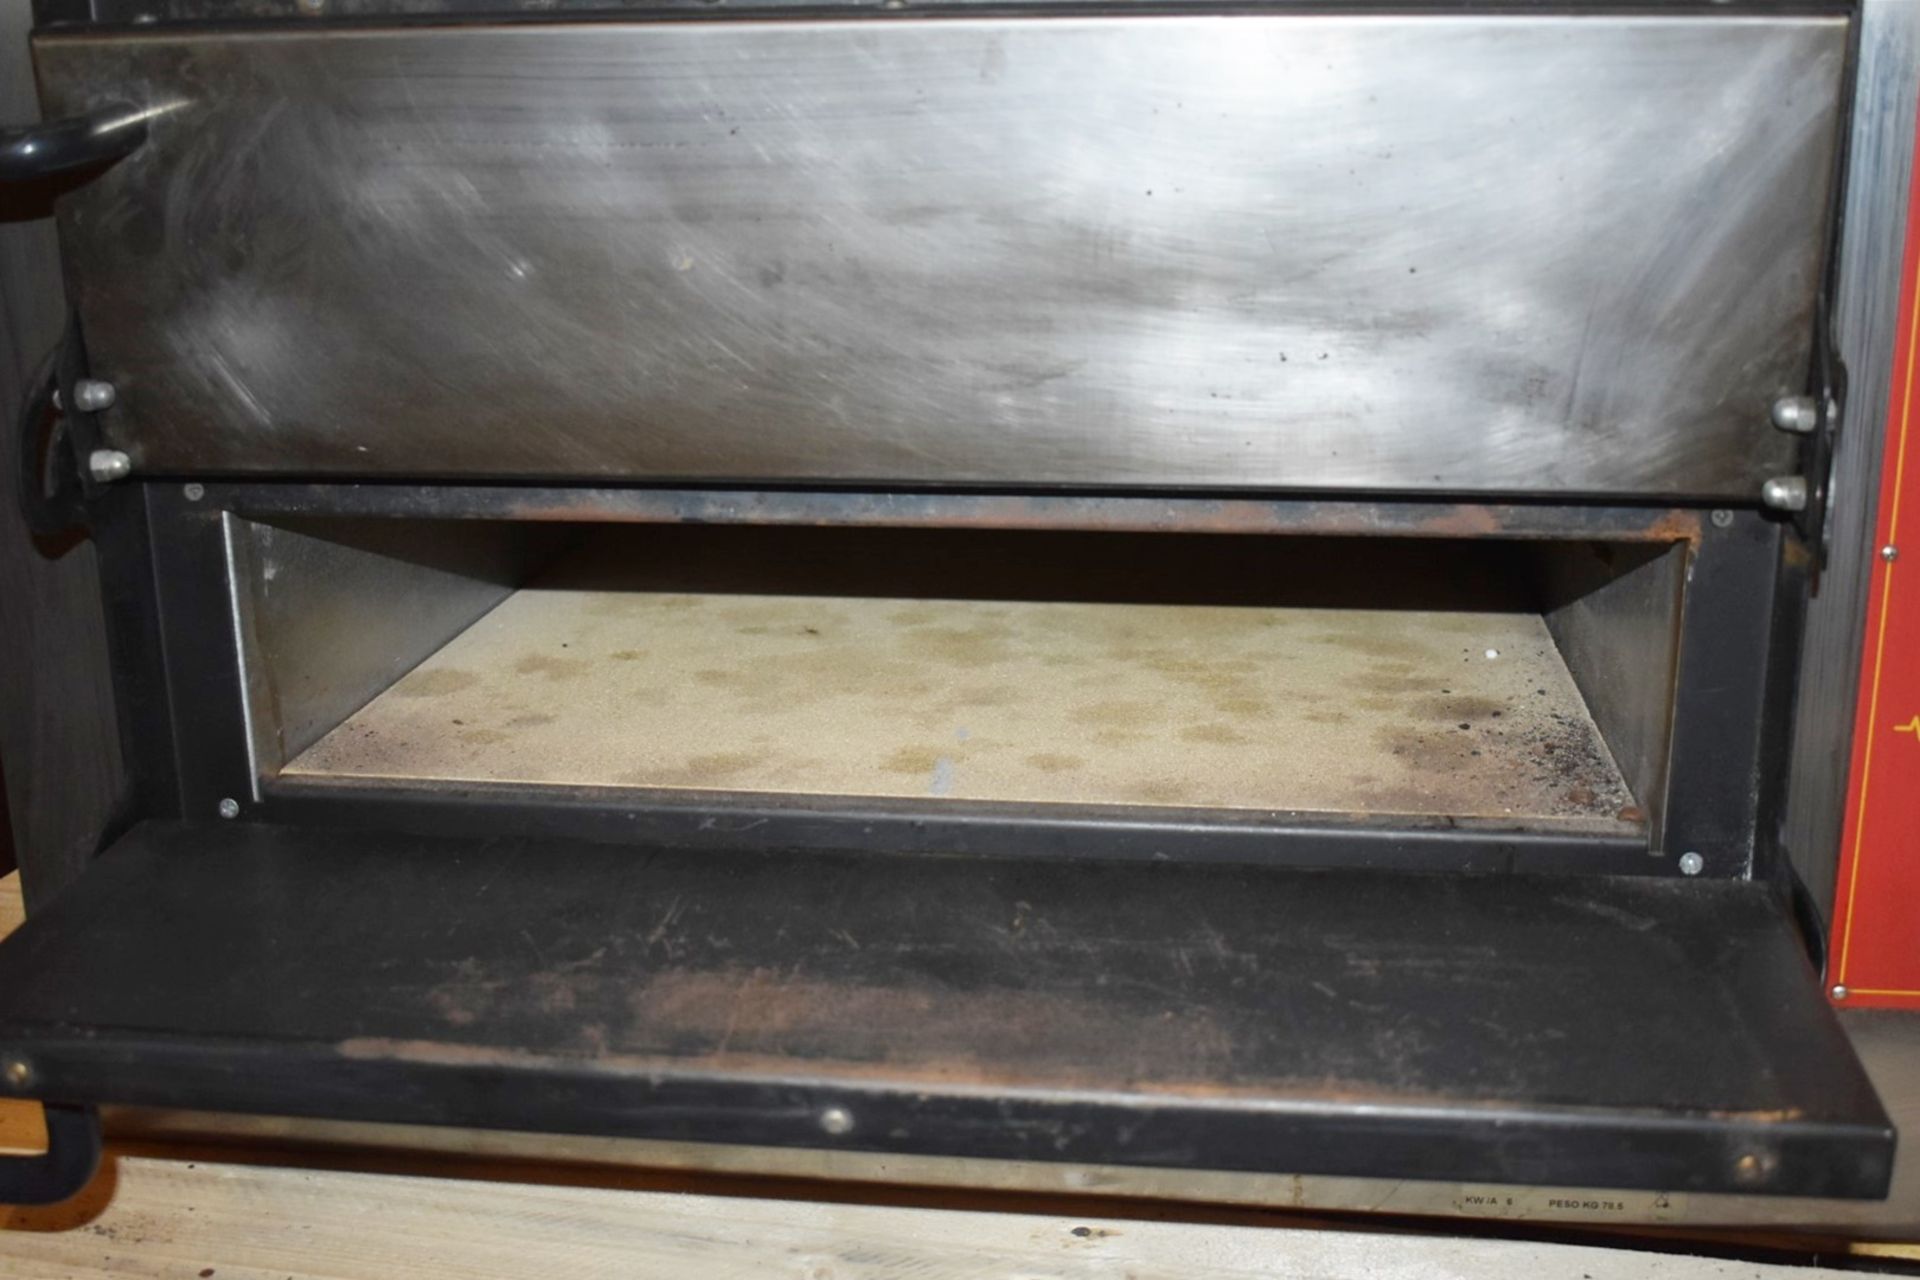 1 x Twin Deck GGF Single Phase PIZZA OVEN With Four Pizza Capacity - Image 6 of 10